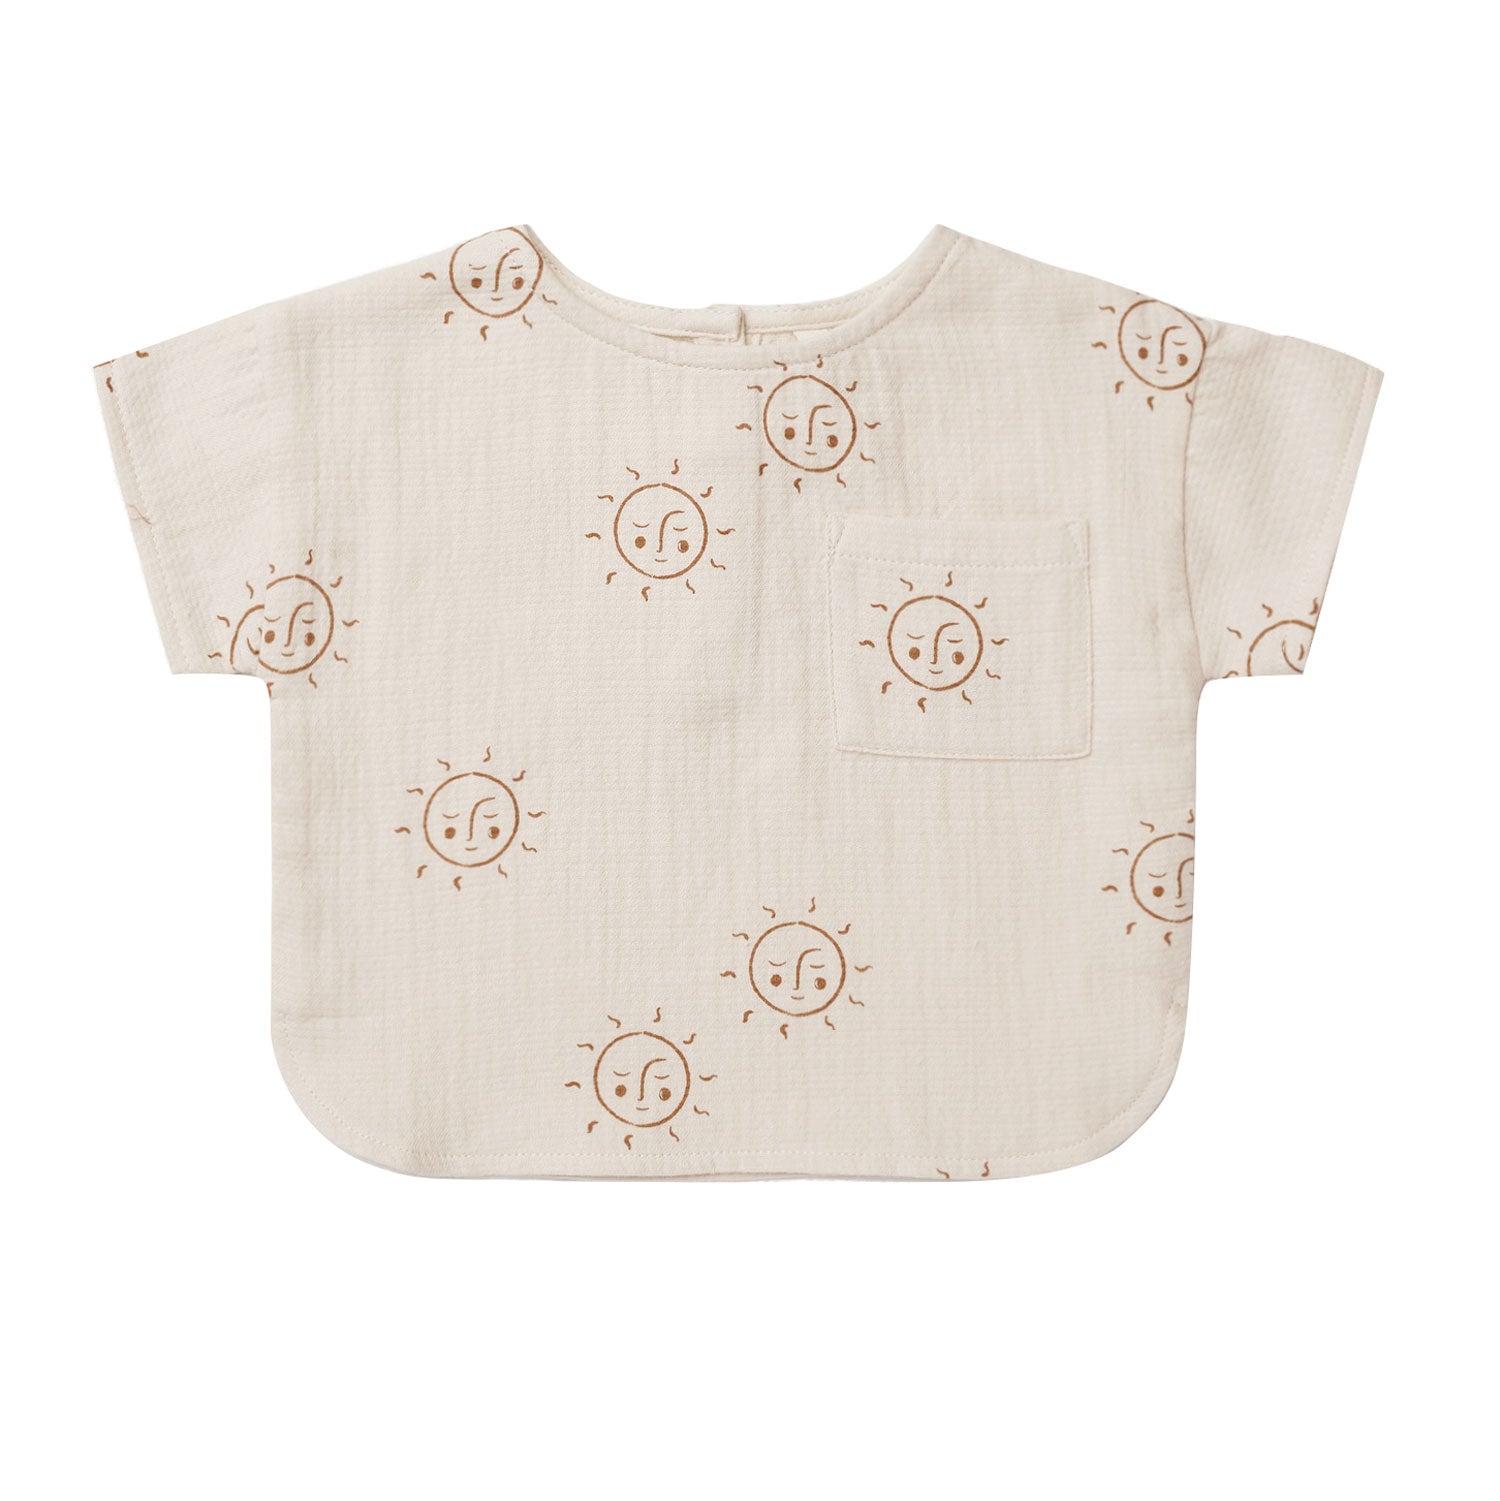 Quincy Mae Woven Boxy Top - Suns - Natural